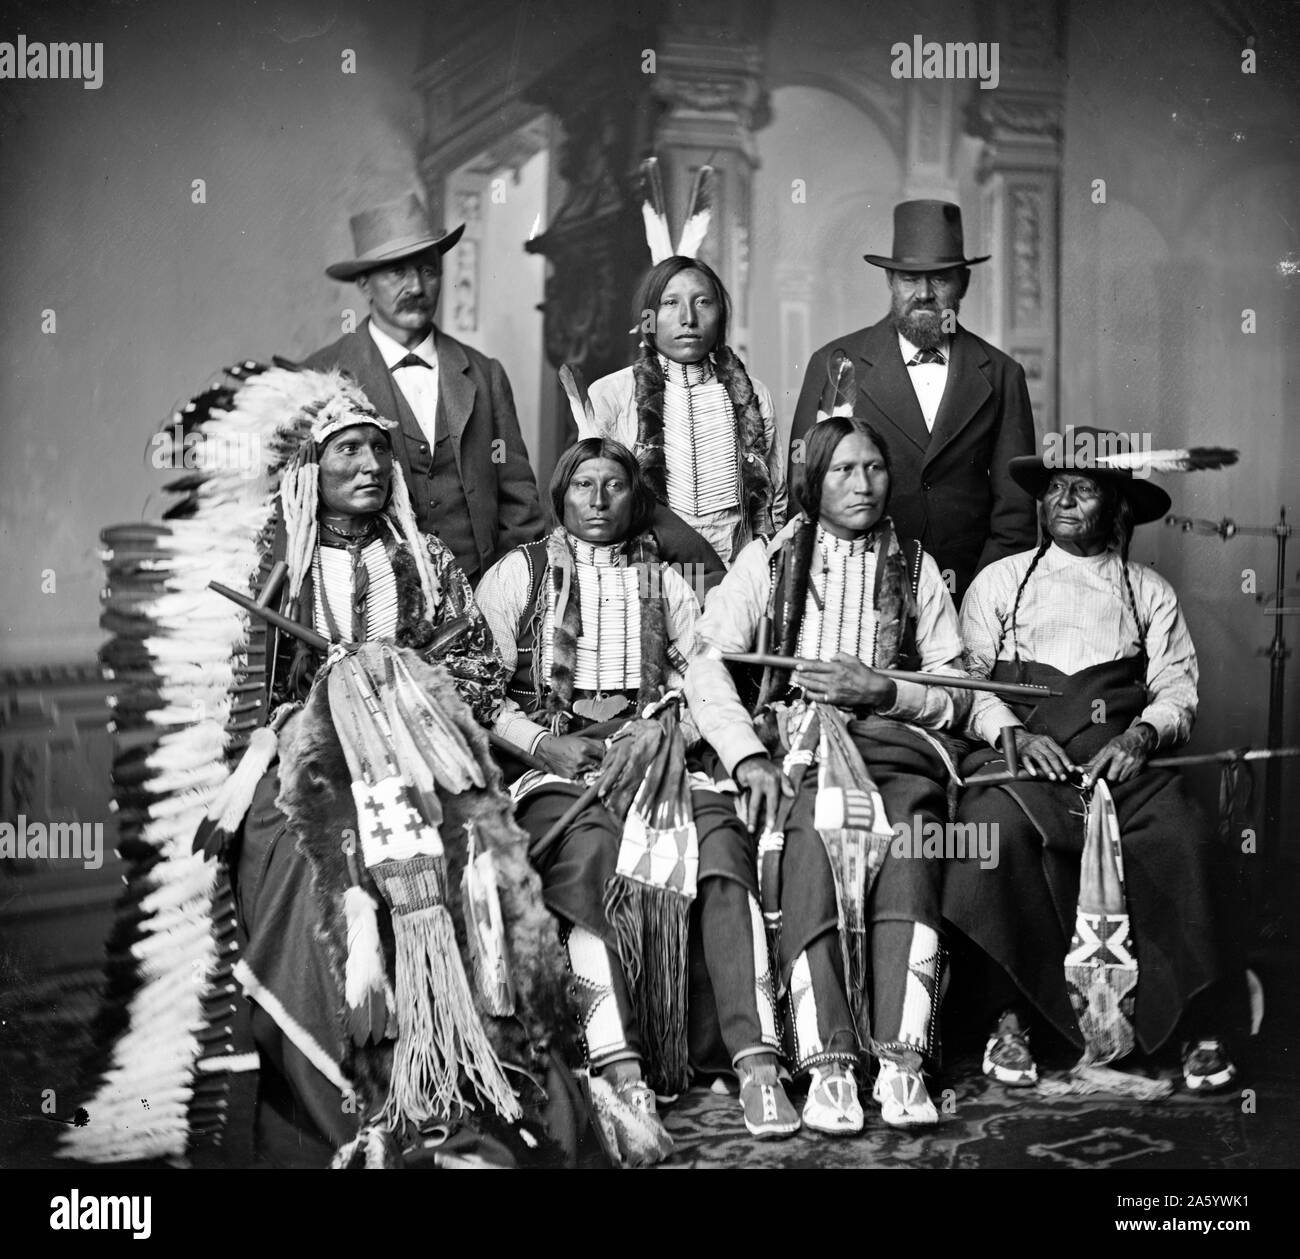 Group of Sioux Indians 'Spotted Tail' (photo c. 1875) Standing: Joe Merrivale; Young Spotted Tail; Antoine Janis; Seated: Touch-the-Clouds; Little Big Man; Black Cool; Stock Photo